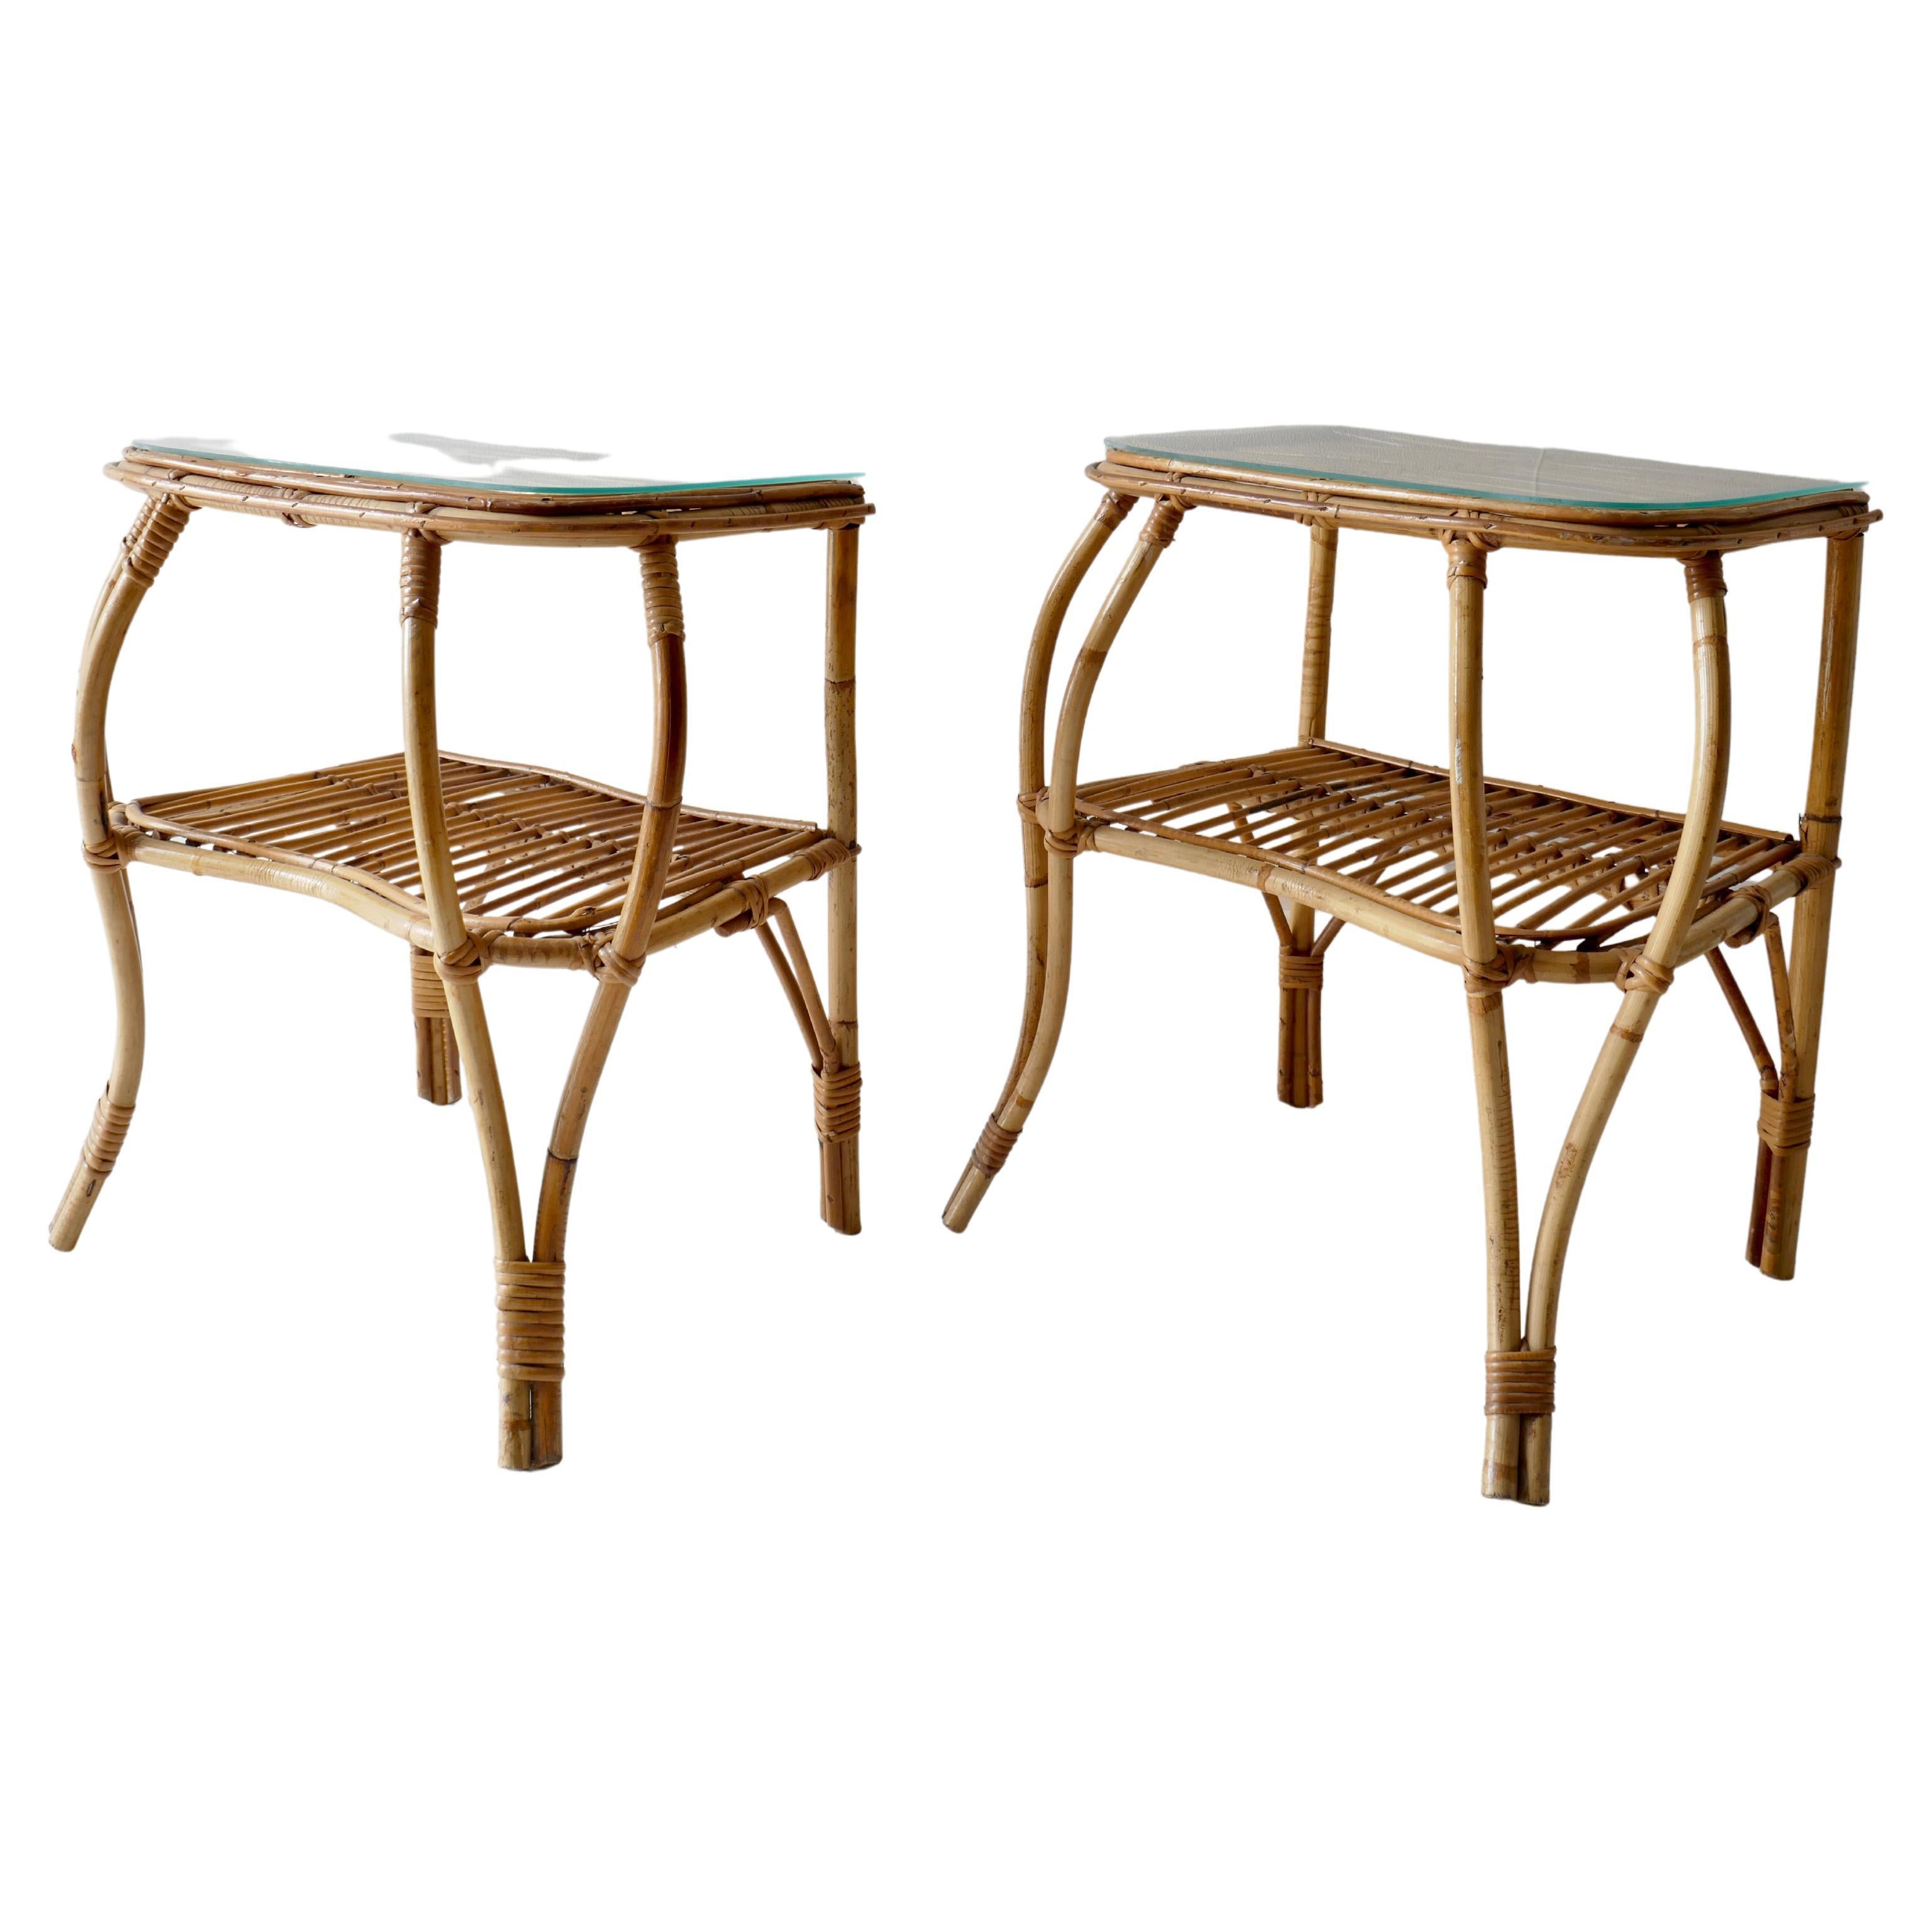 Pair of two tiered Side tables in bamboo and rattan with curved legs.
A glass top has been added to better support anything you place on it.
Sinuous shapes of legs and trays adds fullness whilst keeping its lightness .